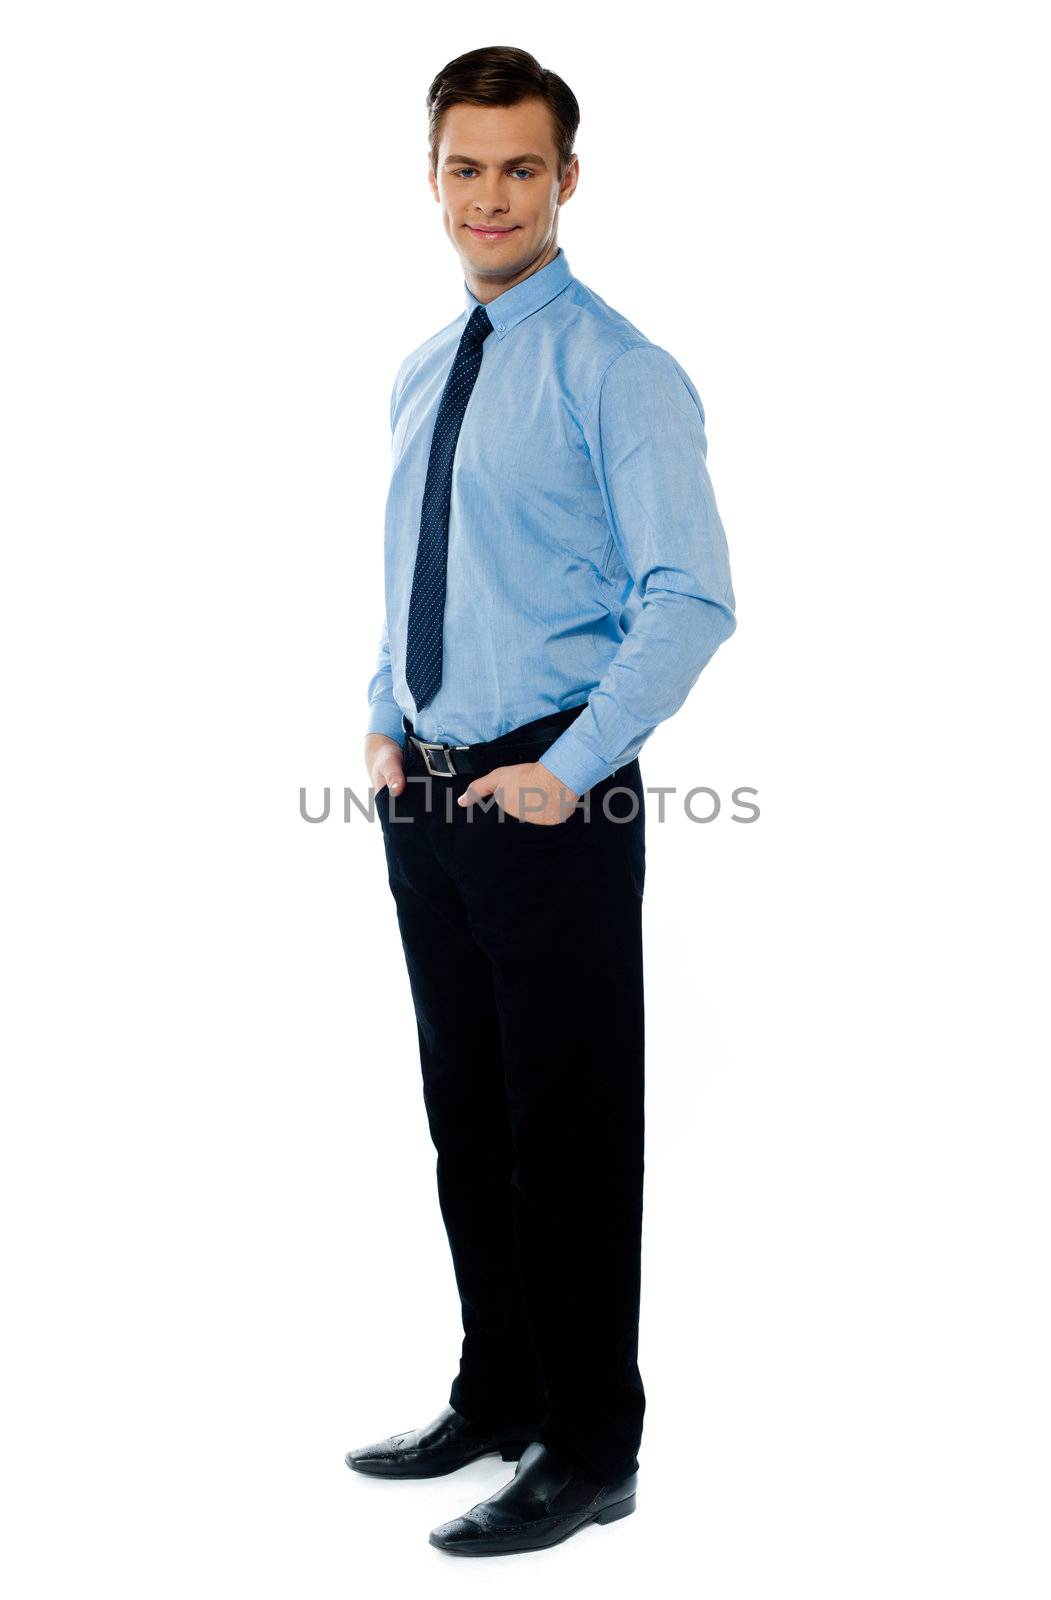 Handsome young business associate standing with hands in his pocket